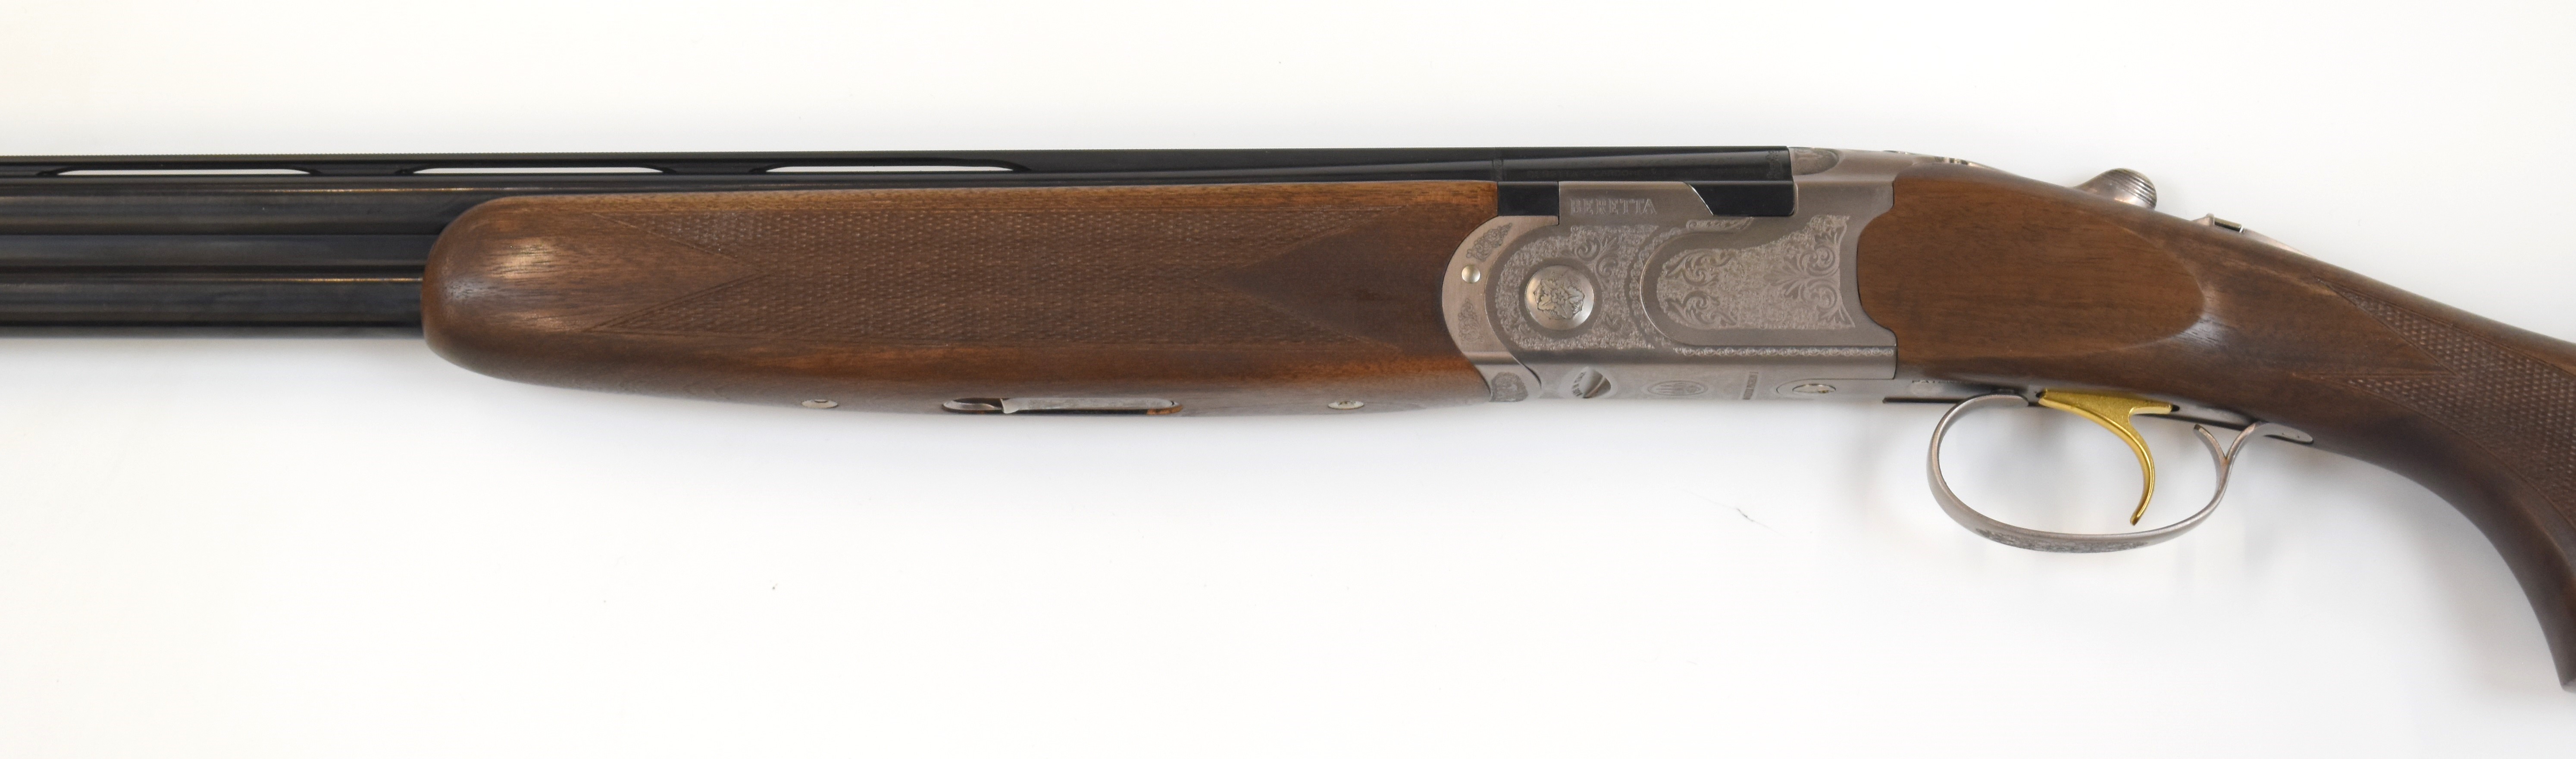 Beretta 686 Silver Pigeon I 28 bore over and under ejector shotgun with named and engraved lock - Image 25 of 28